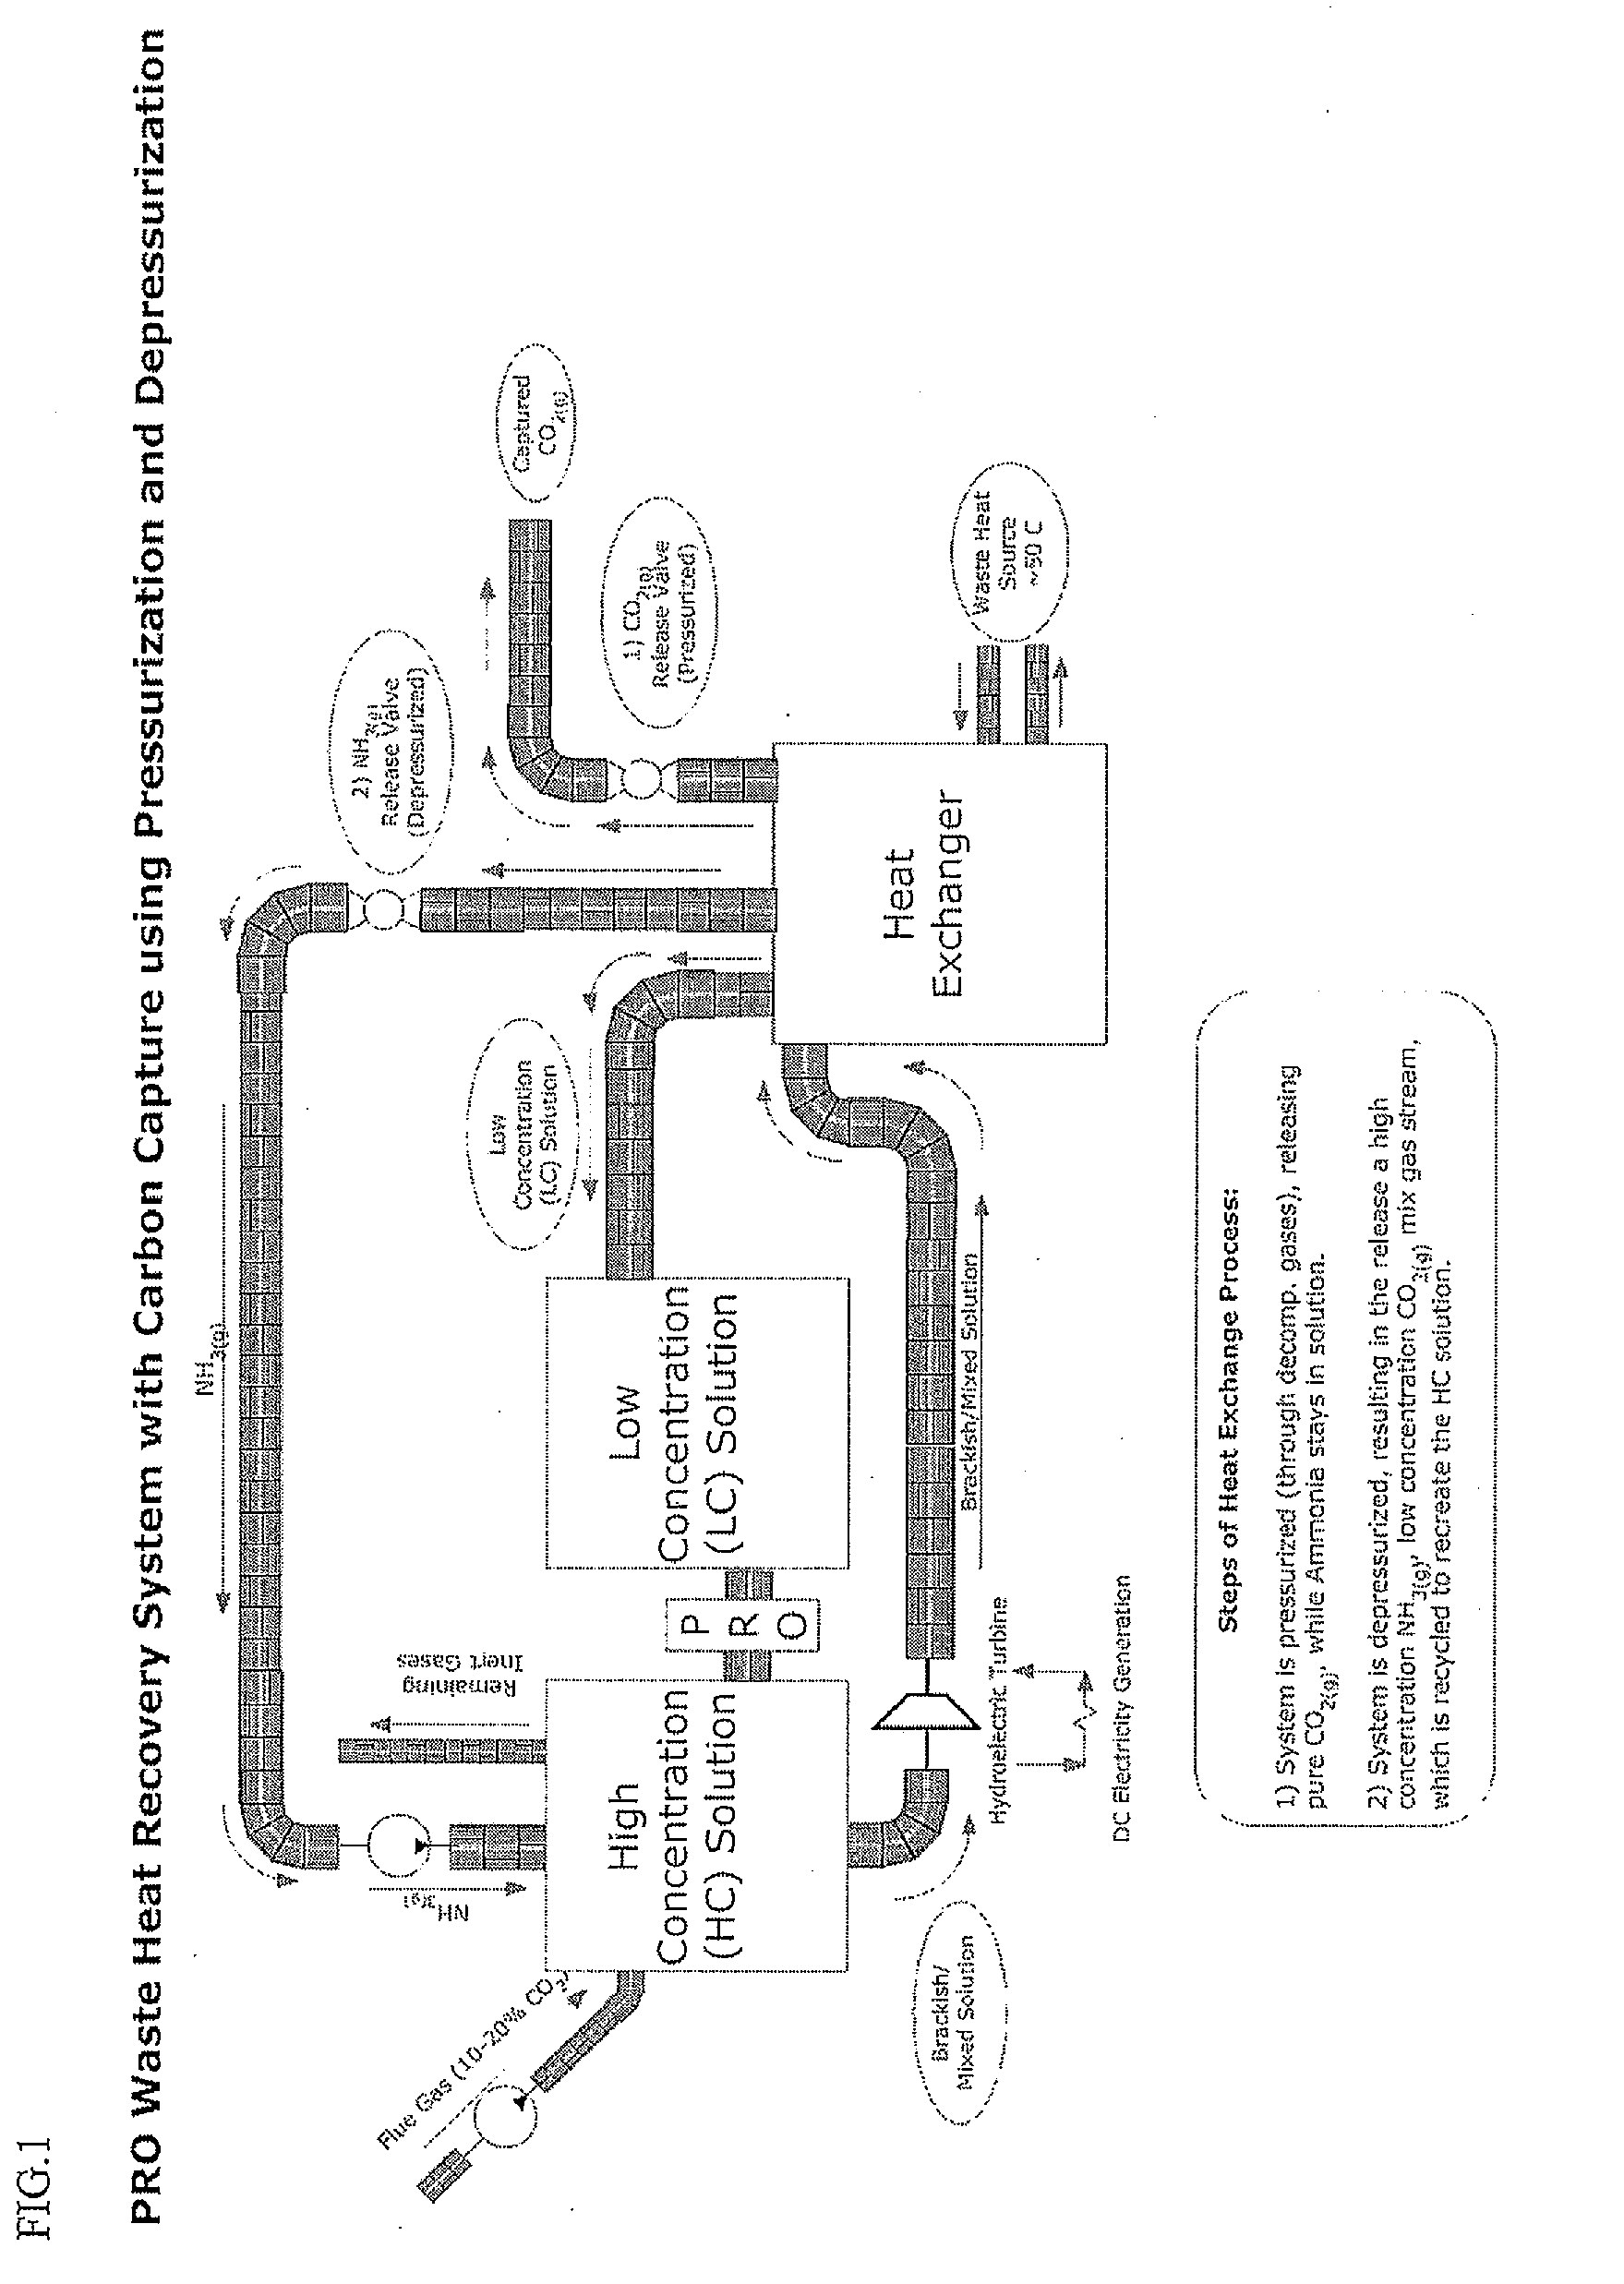 Integrated process for carbon capture and energy production